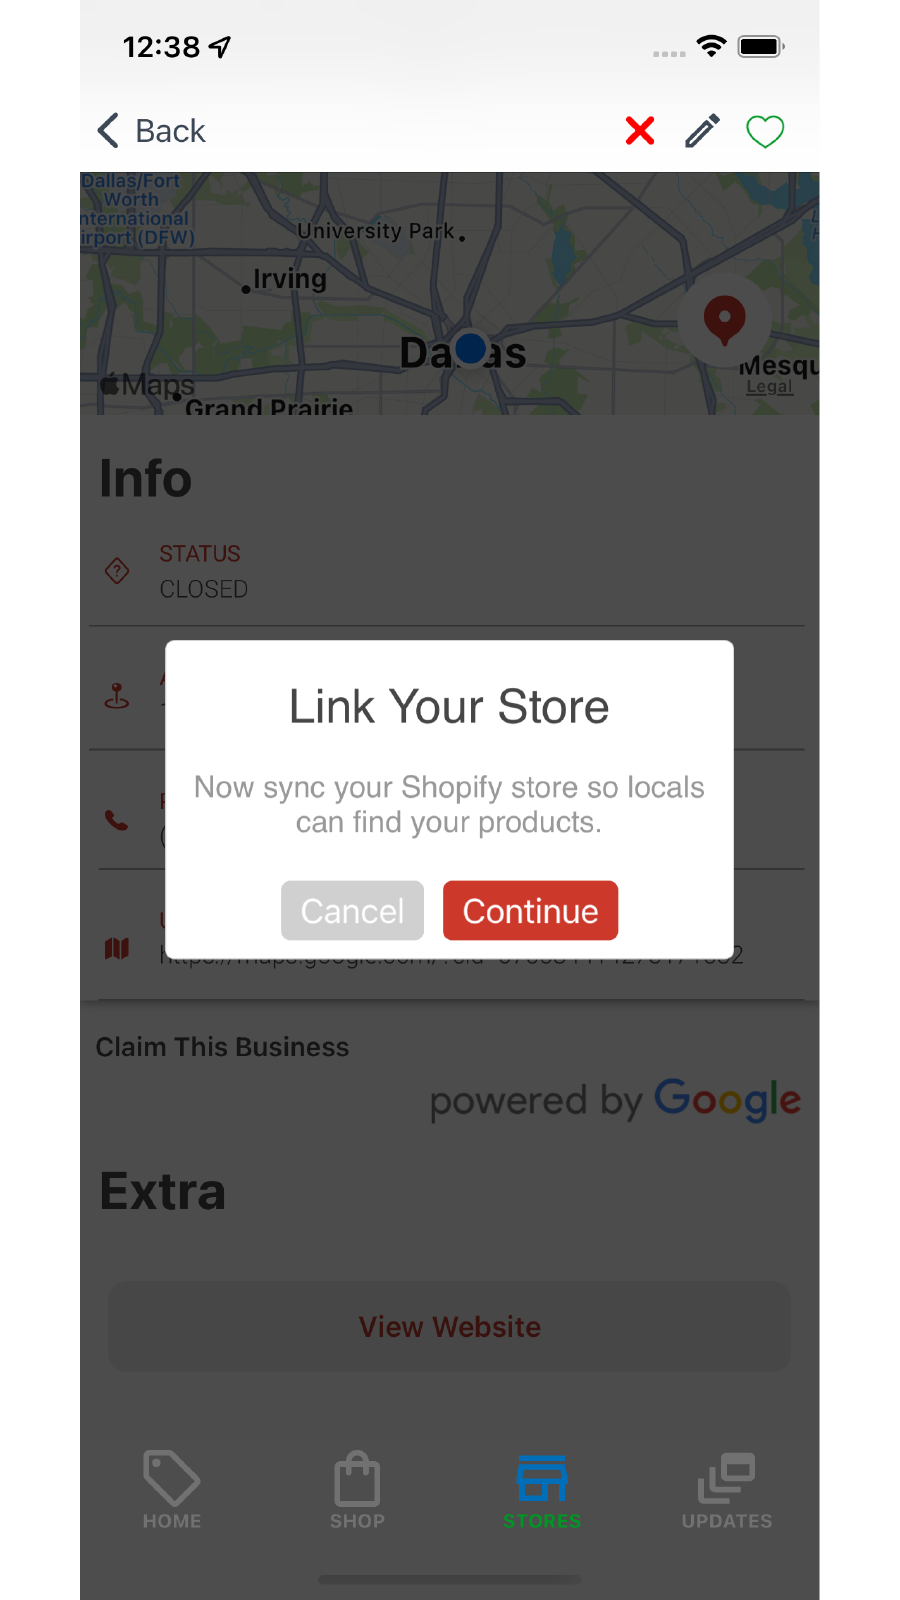 Link your store on mobile app storefront